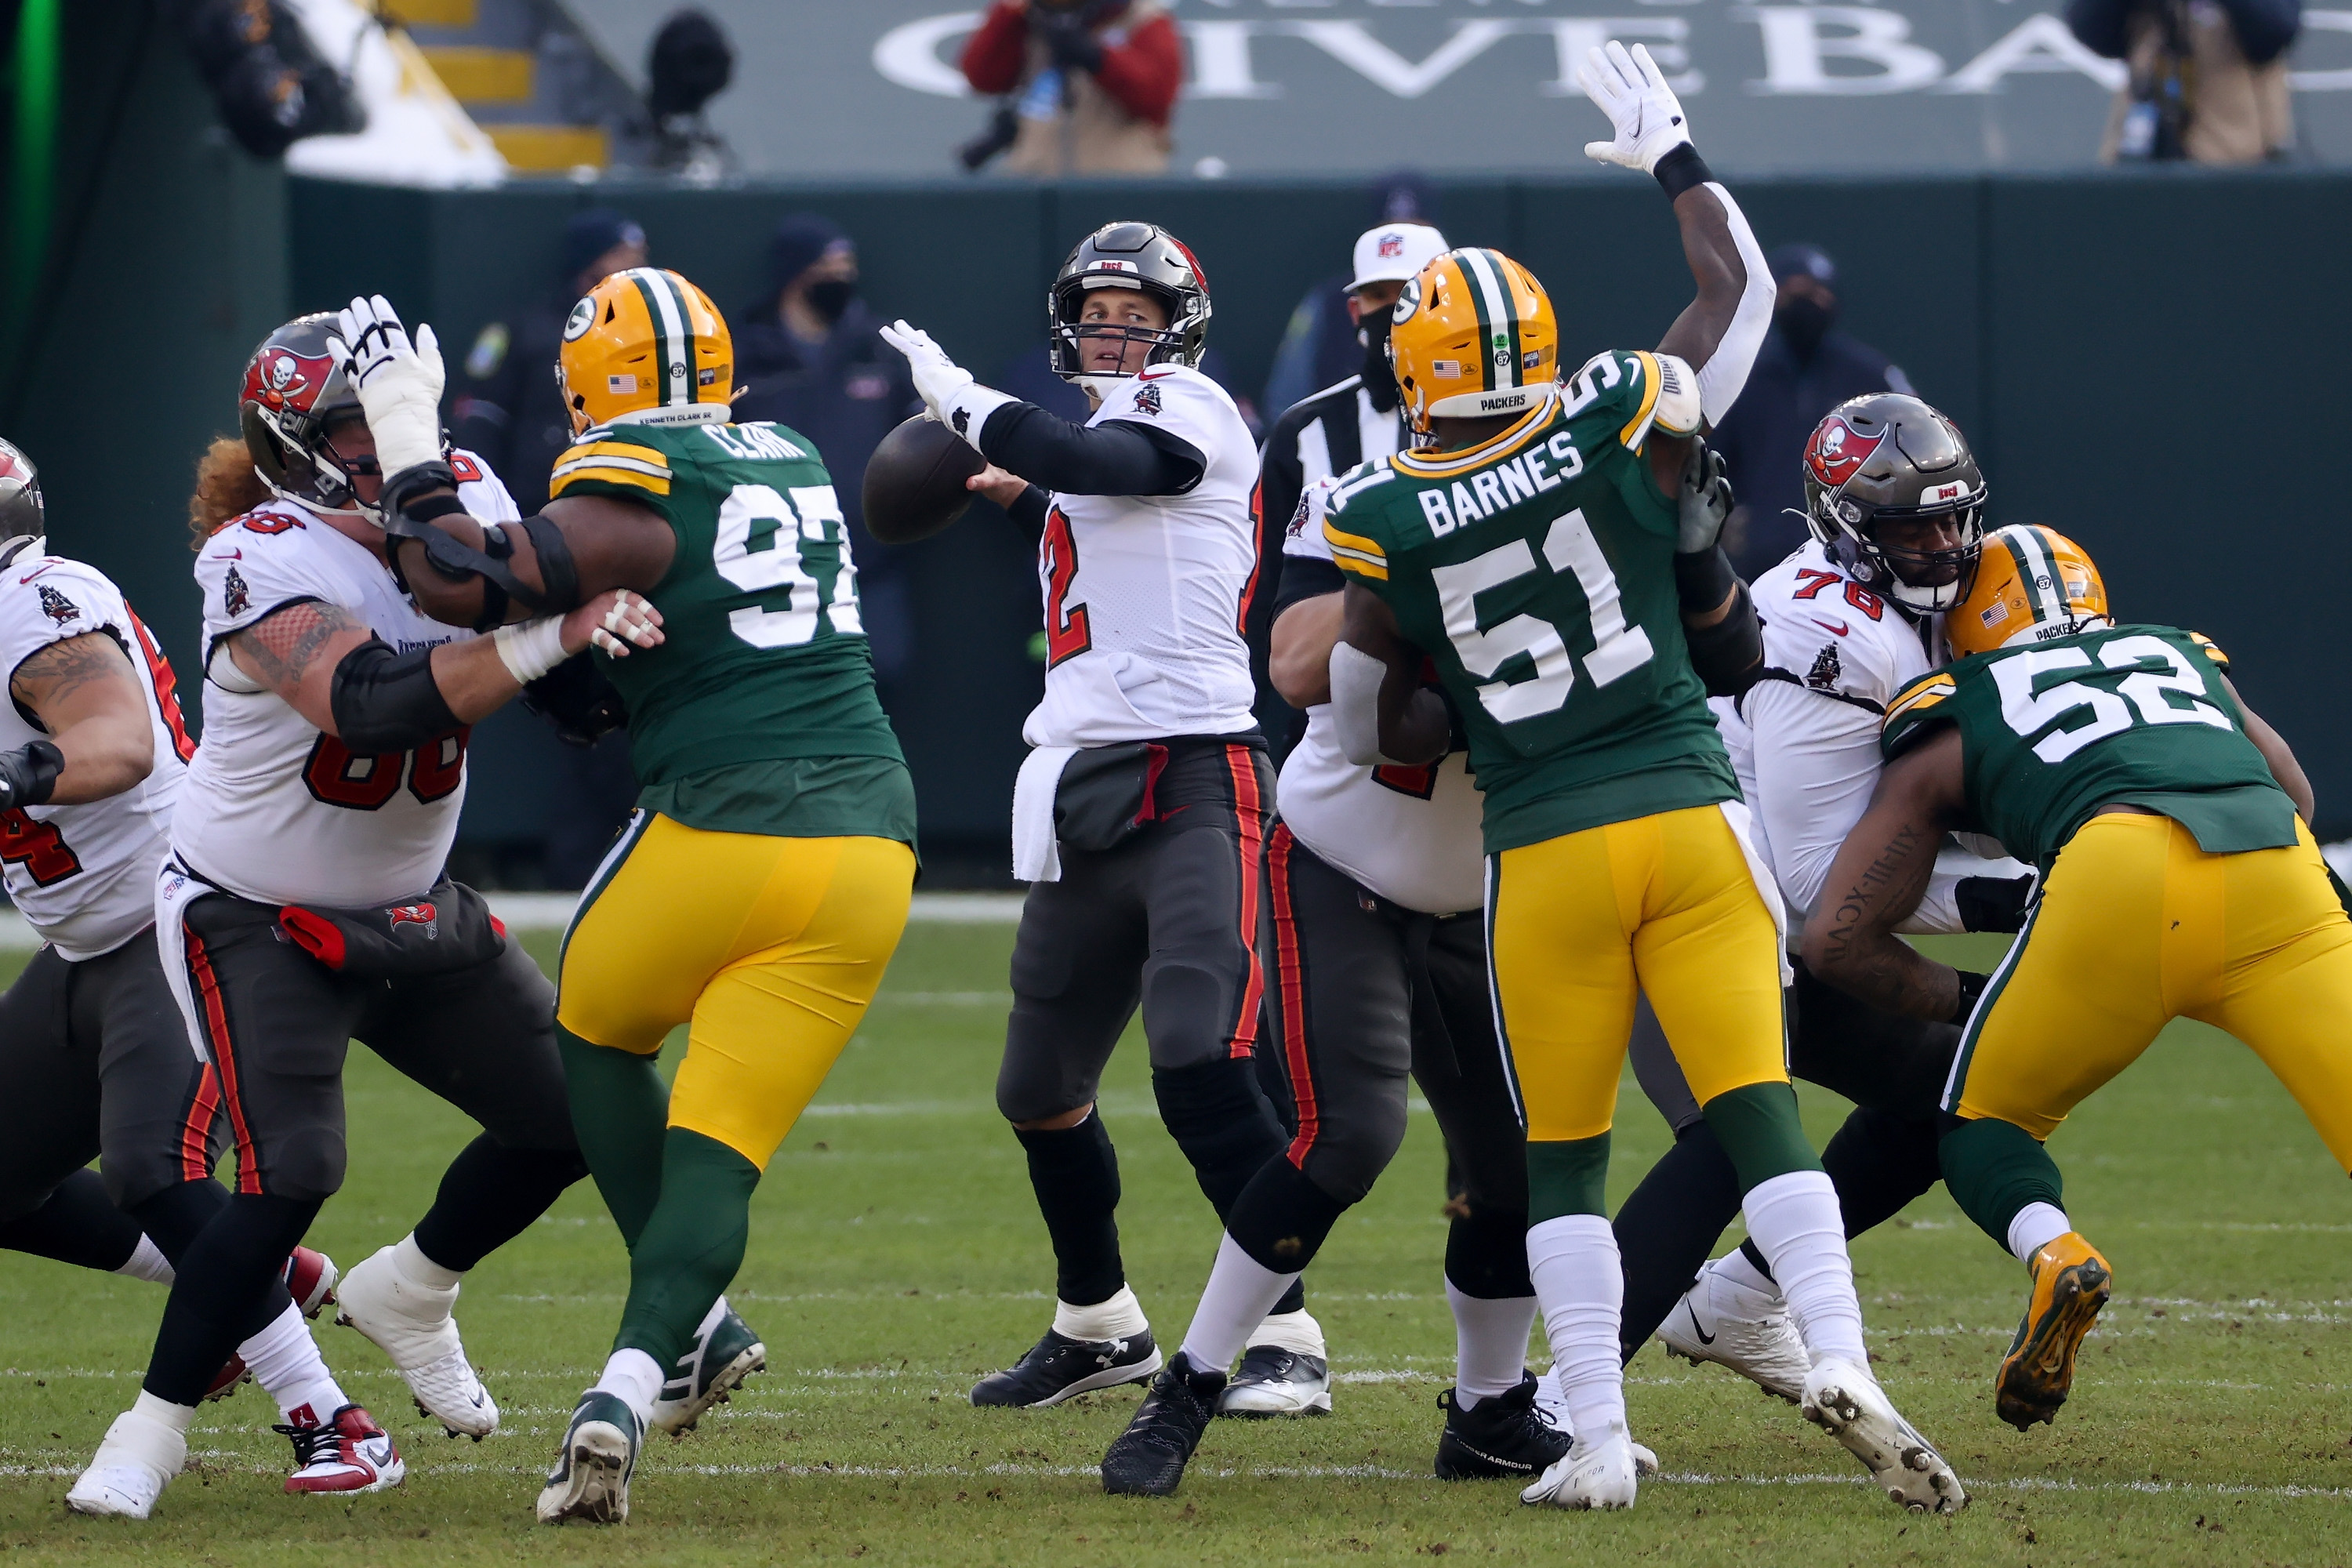 It wasn't just on the field where the Tampa Bay Buccaneers defeated the Green Bay Packers.